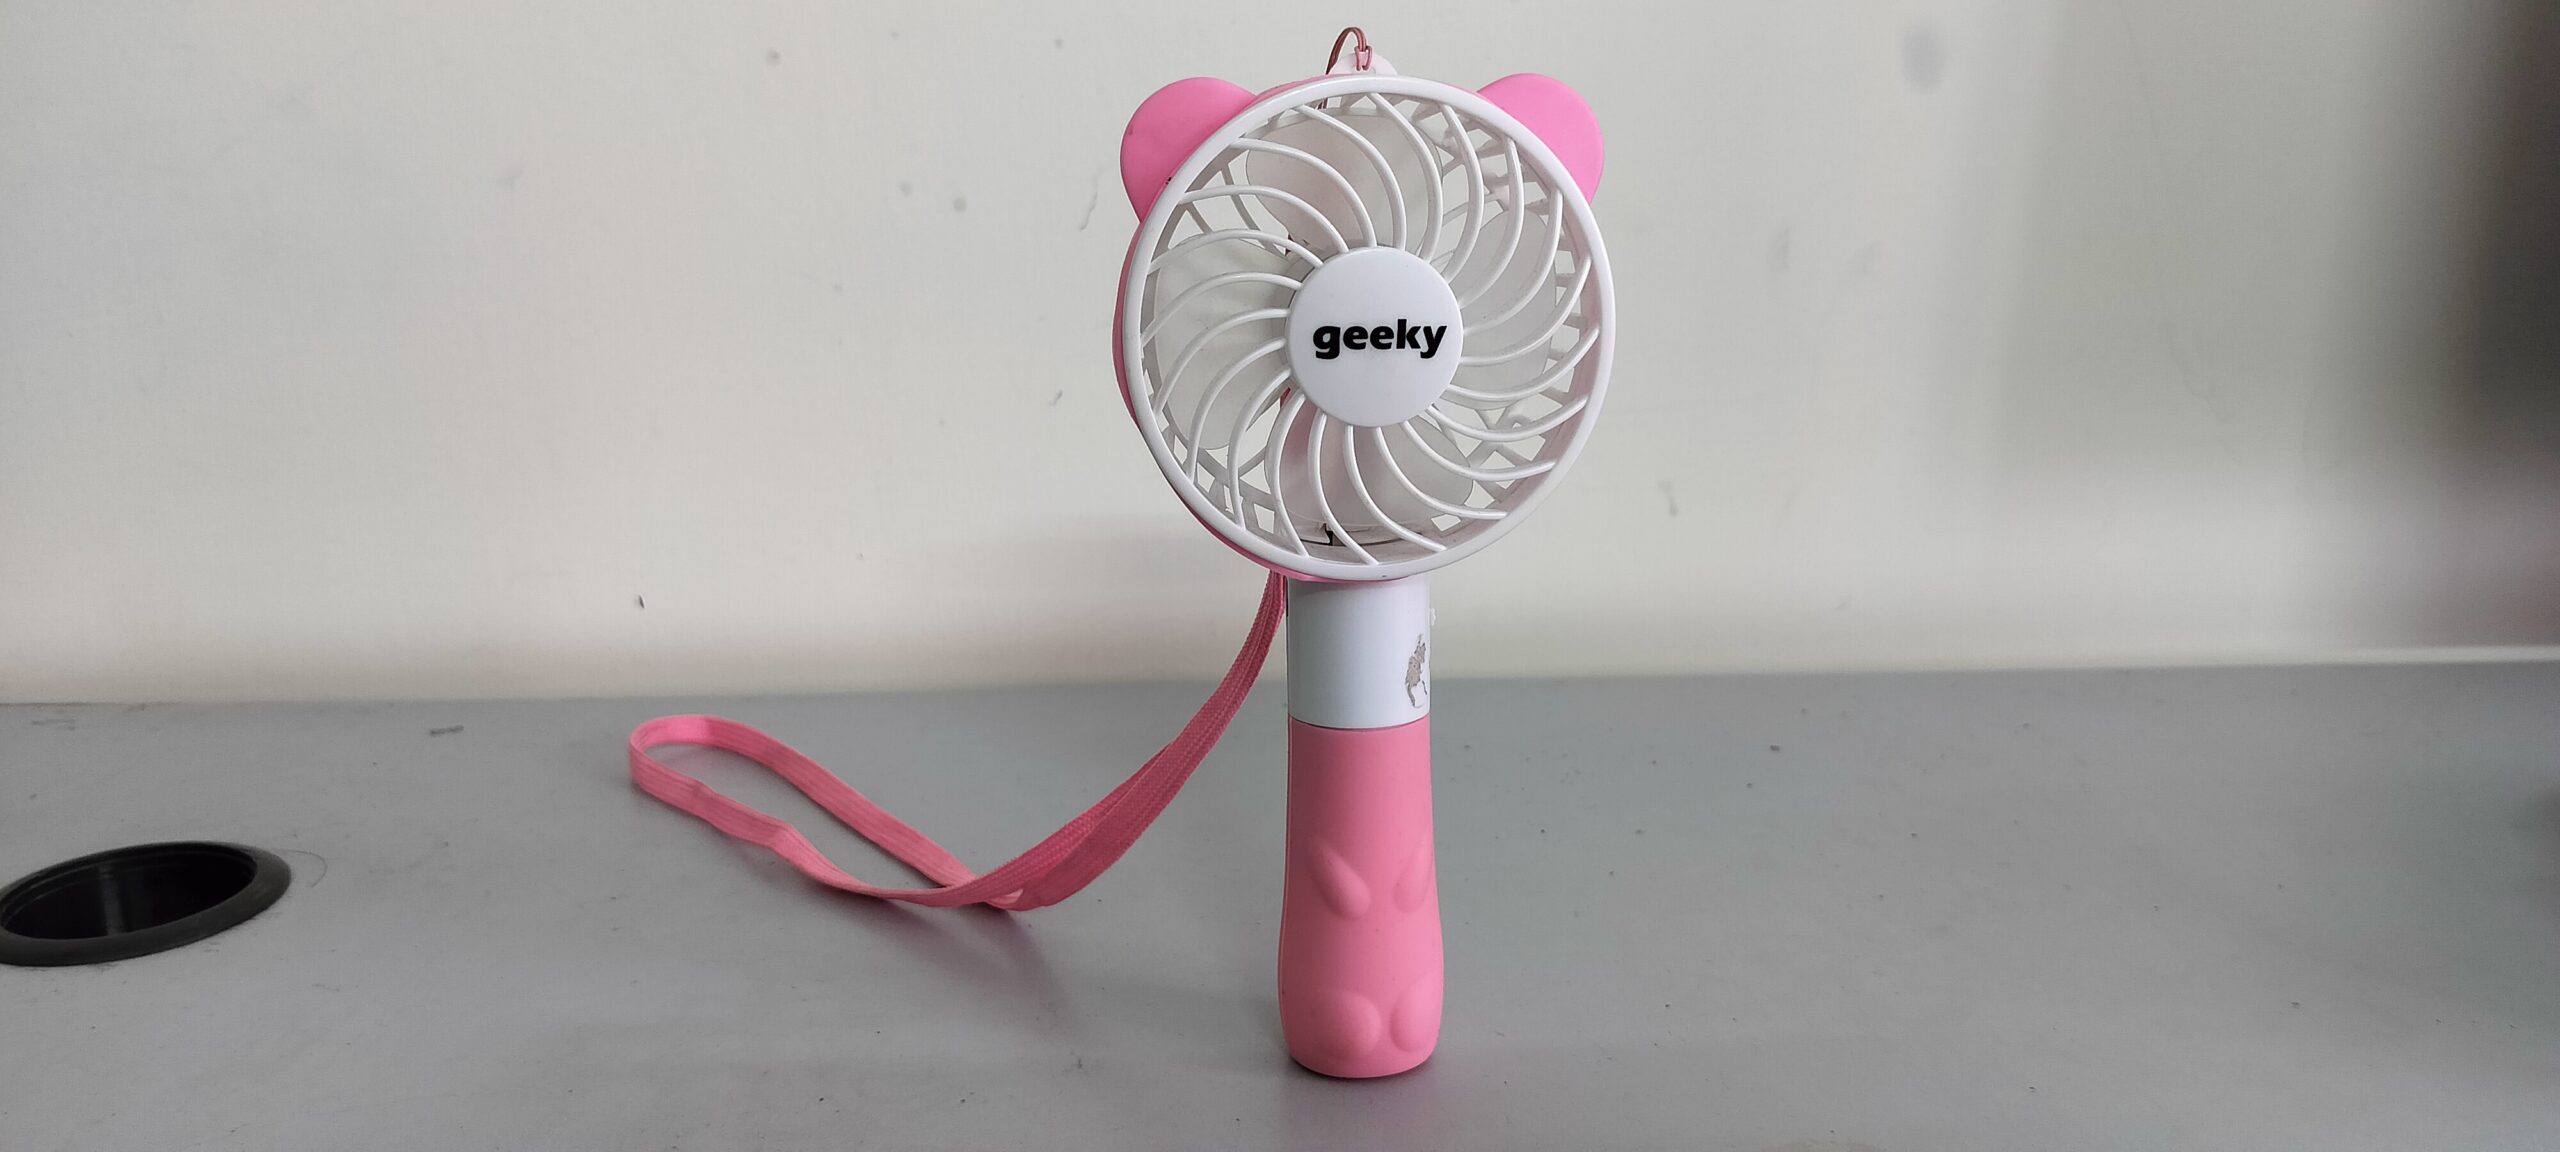 Geeky Portable Rechargeable Handheld Fan Review scaled